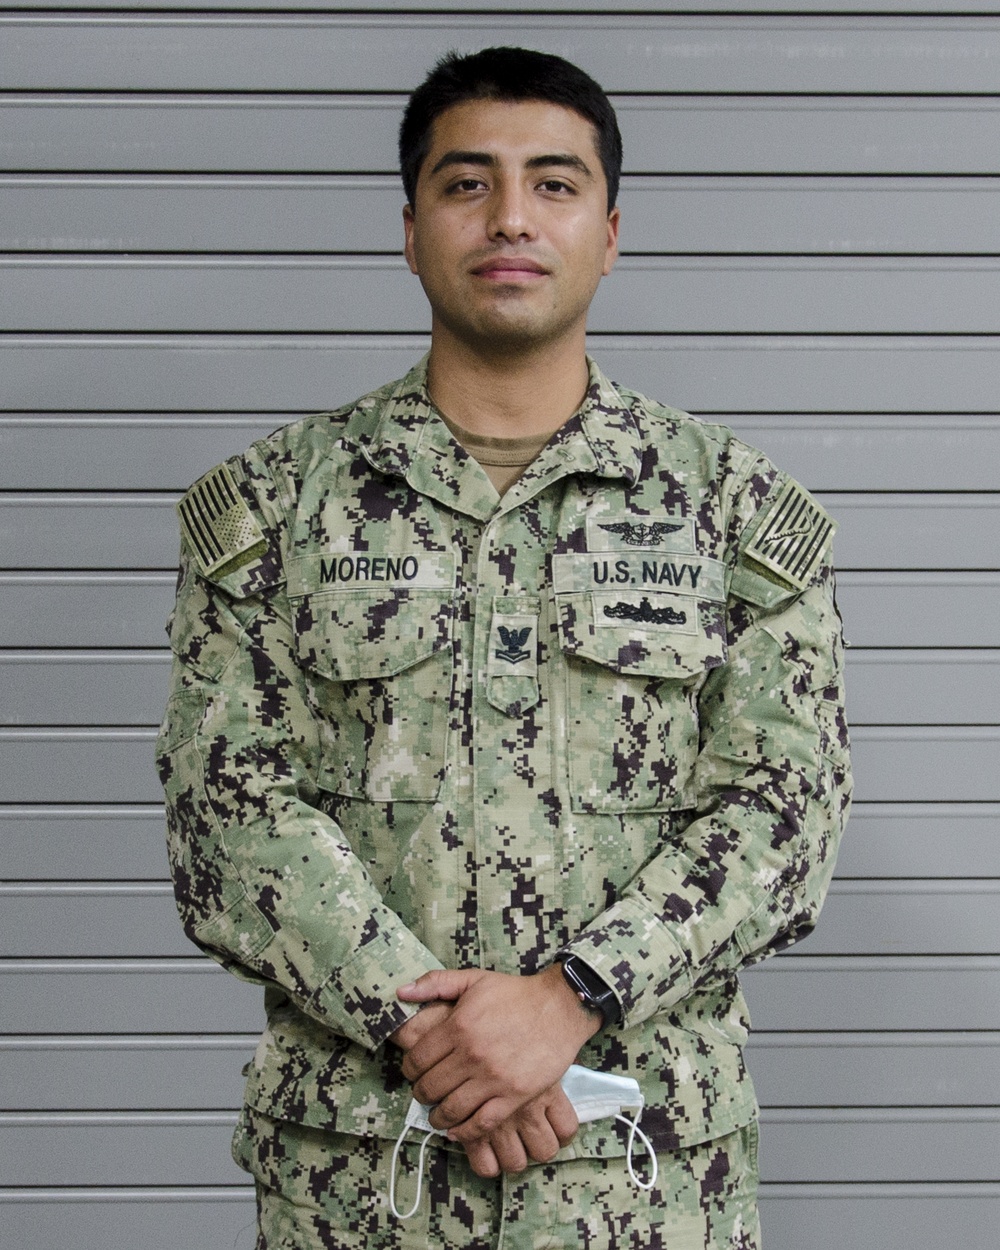 ABE2 Ivan Moreno, Navy Region Southeast Shore Based Aircraft Launch and Recovery Equipment (ABE) Technician of the Year